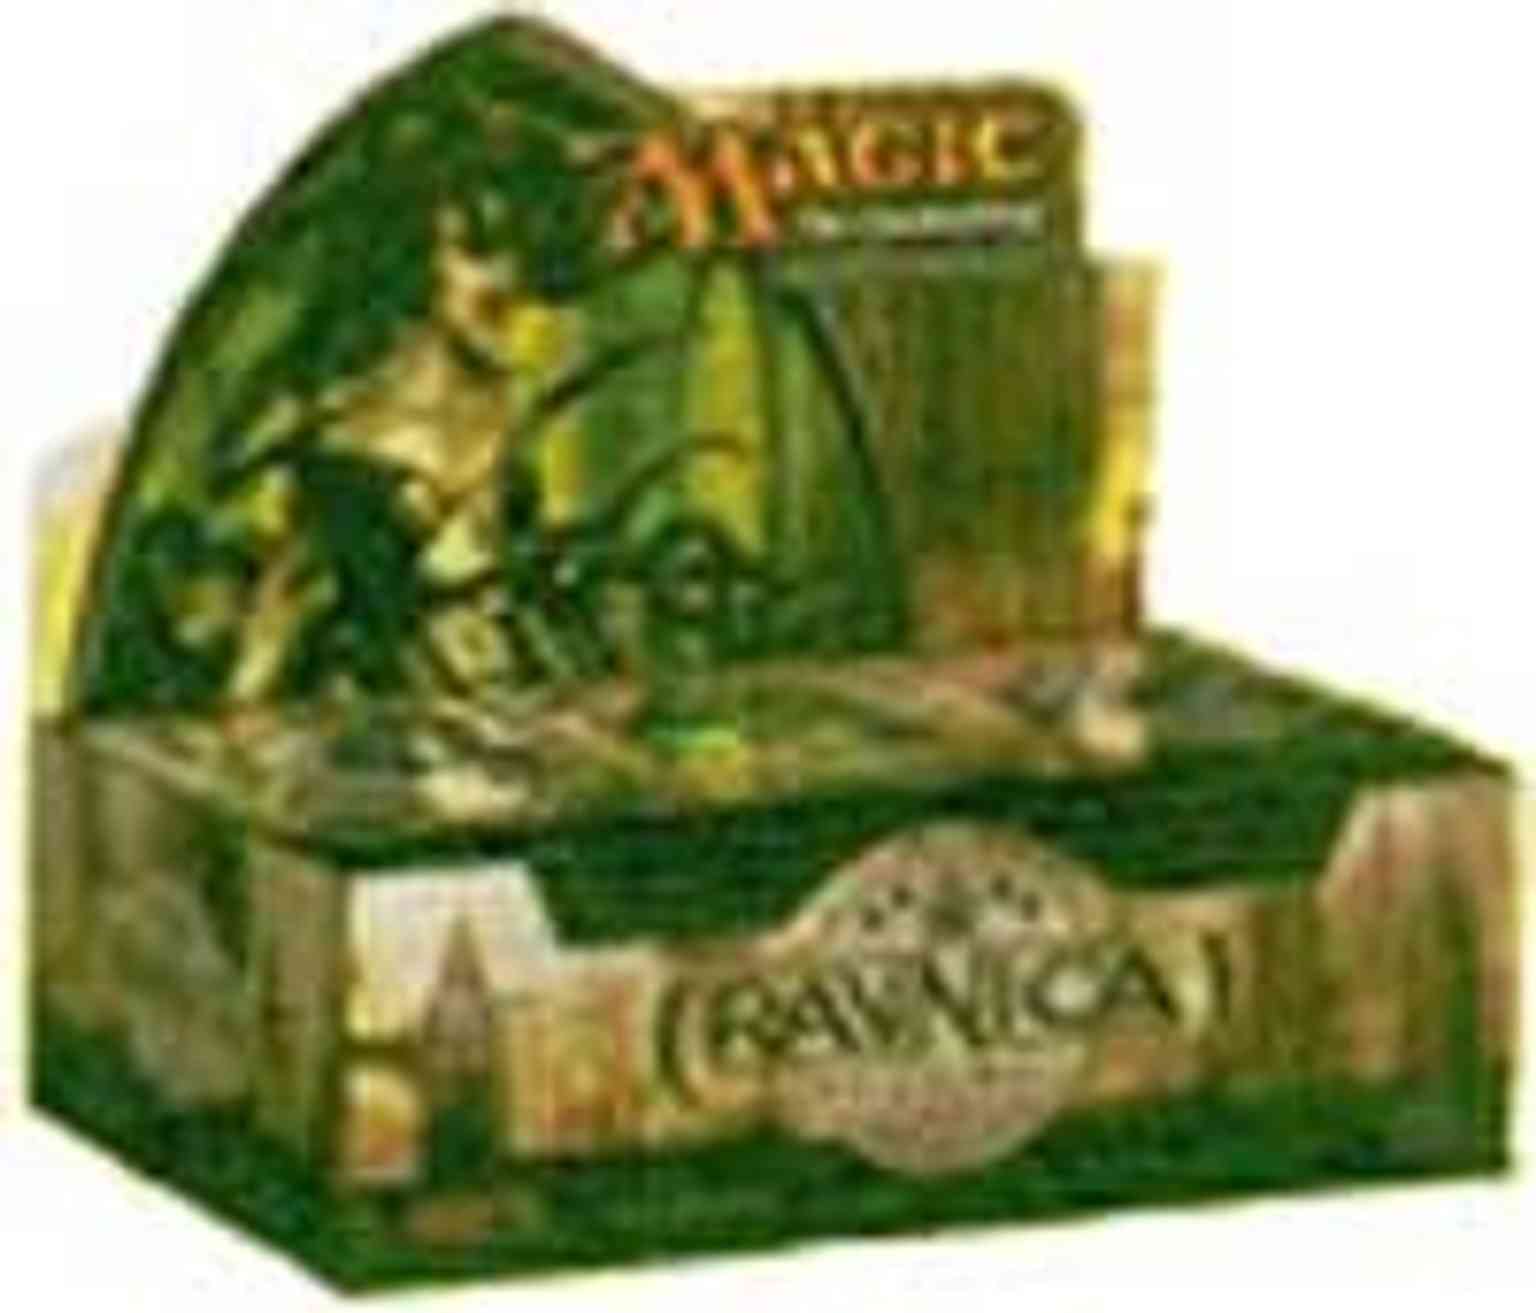 Ravnica - Booster Box magic card front